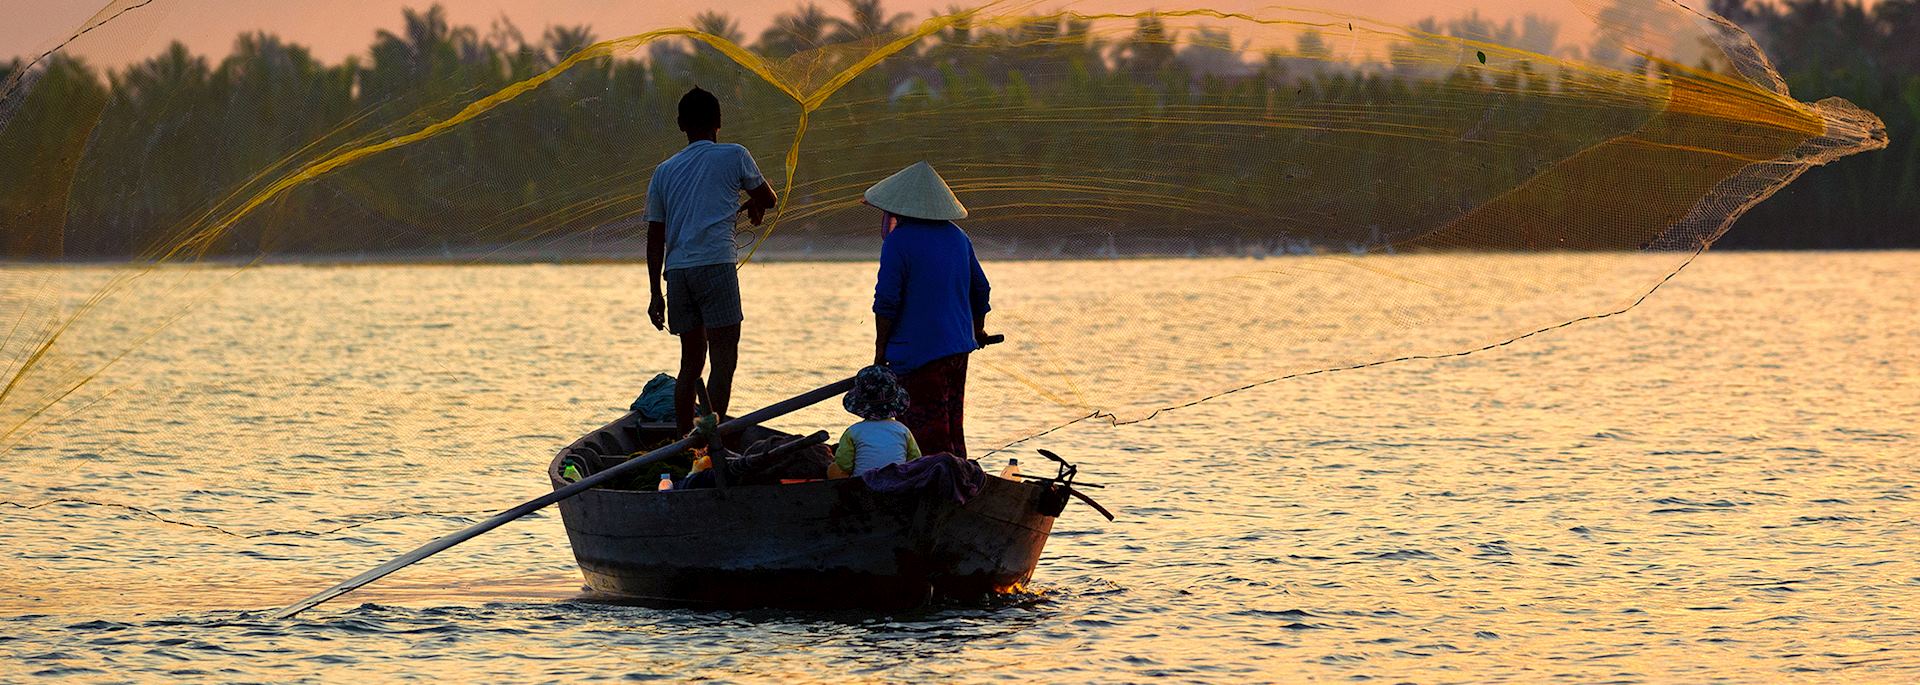 Last catch of the day, Hoi An, Vietnam